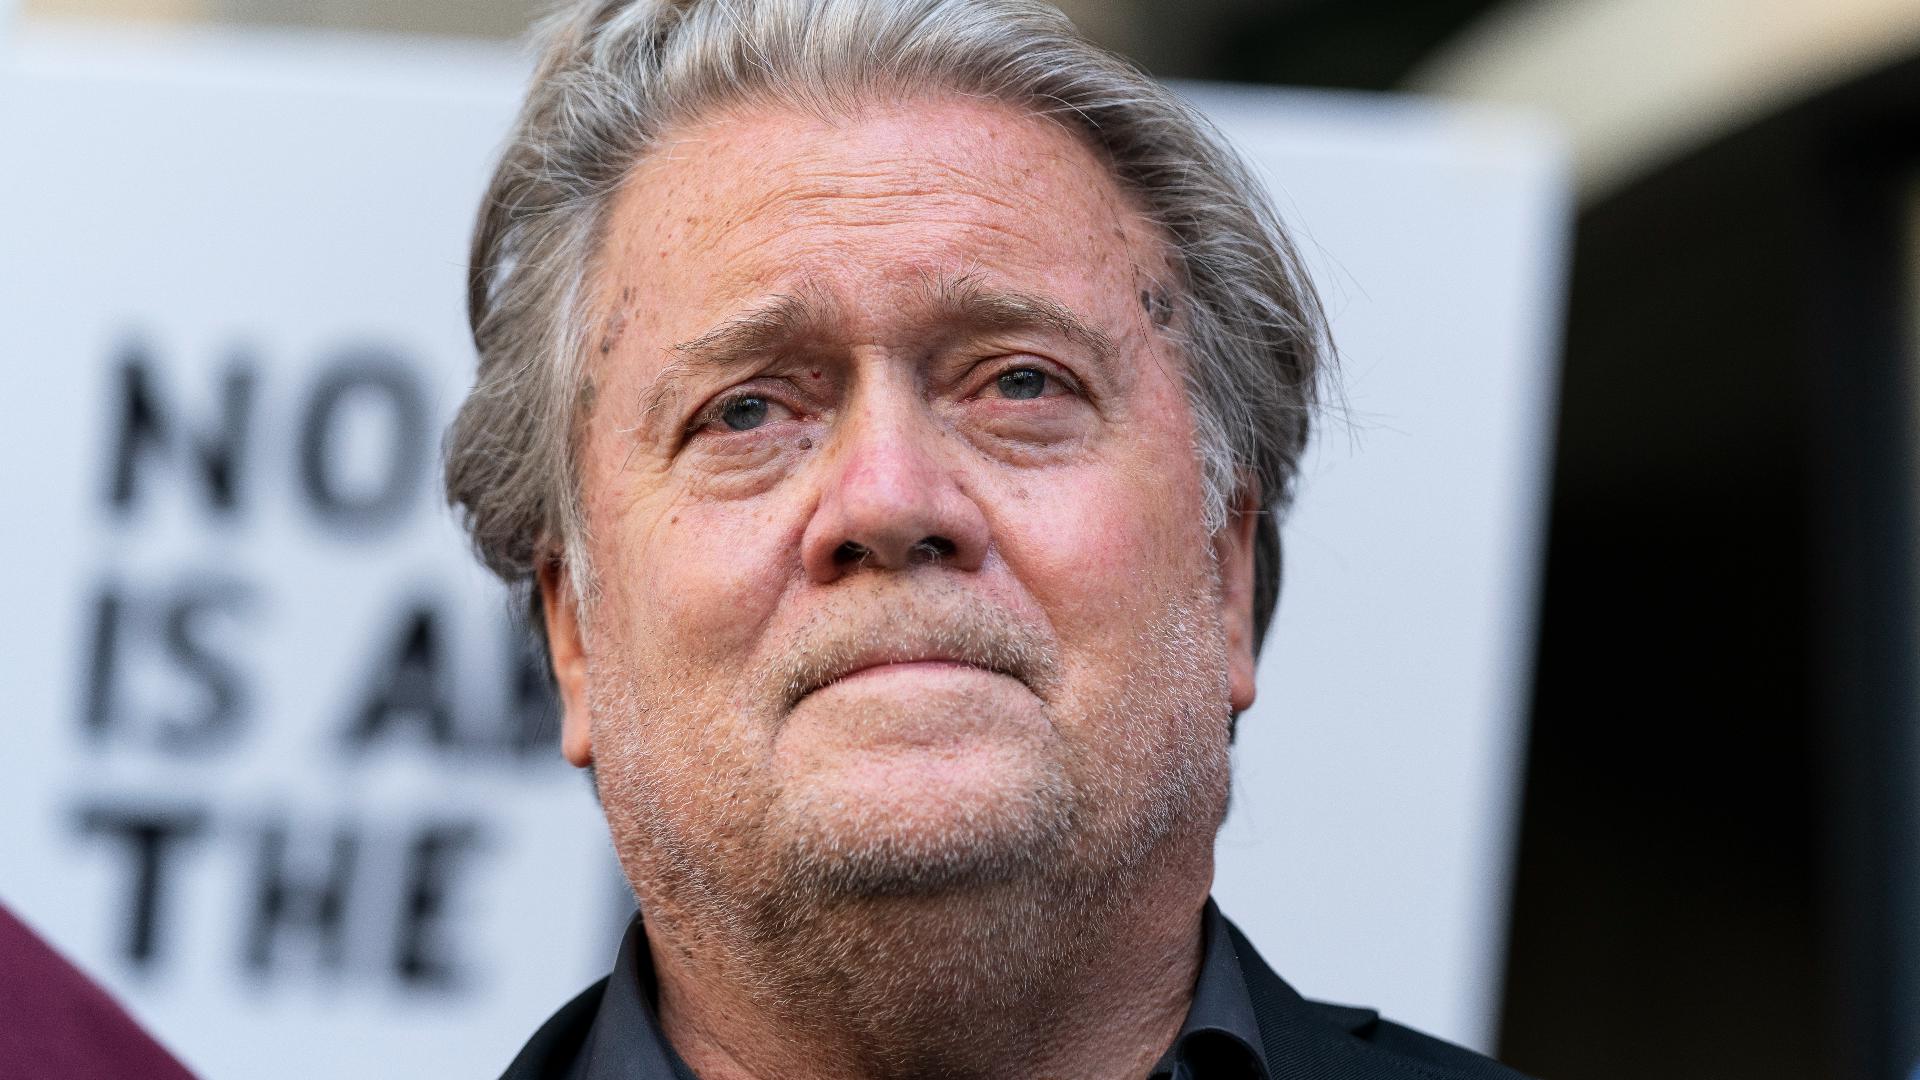 The Supreme Court rejected his last-minute appeal to stave off his sentence, cutting off Bannon's last hope of staying free.